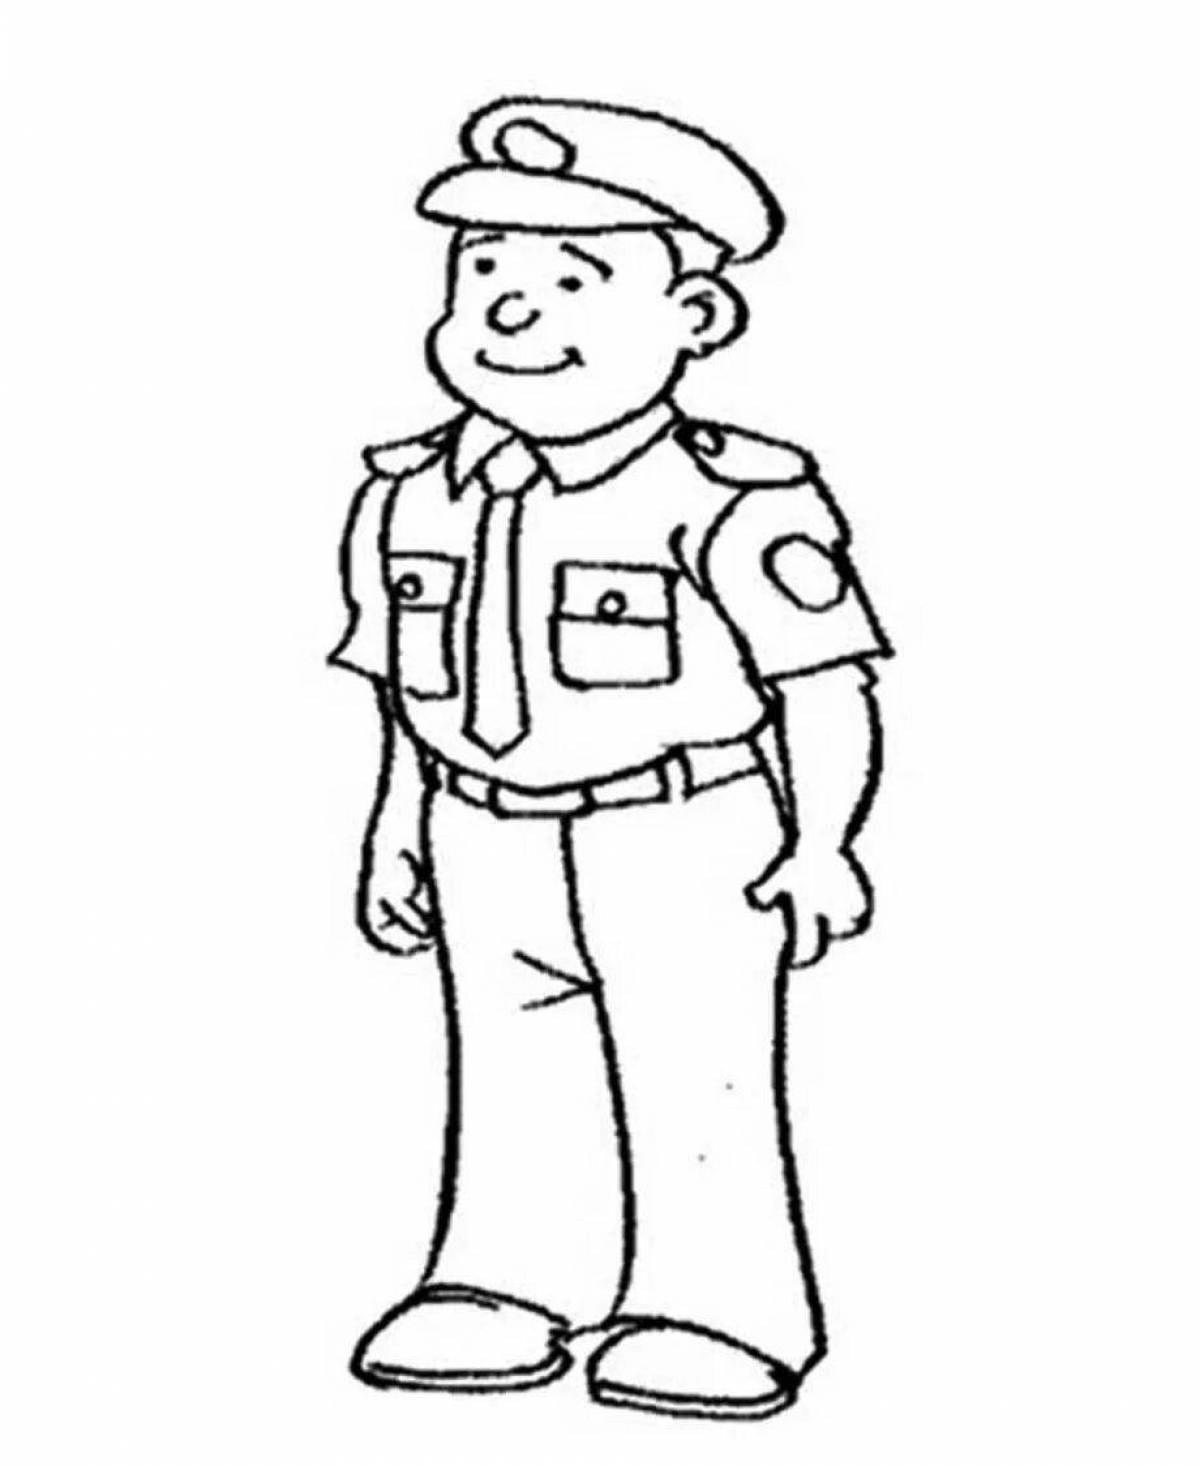 Coloring police officer